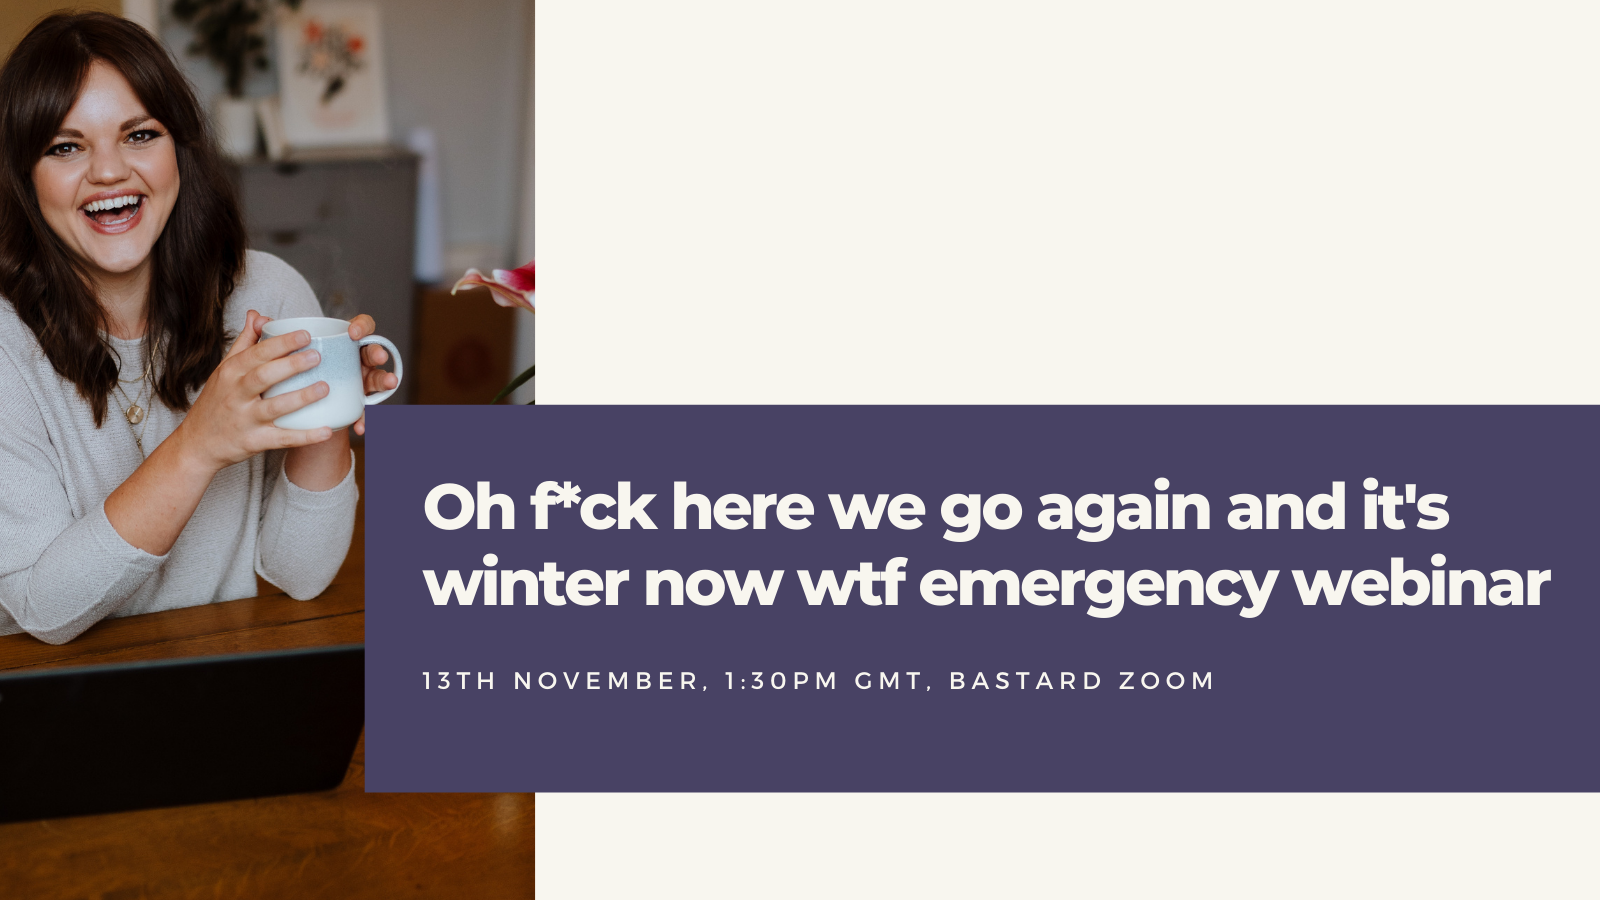 Oh f*ck here we go again and it’s winter now wtf emergency webinar